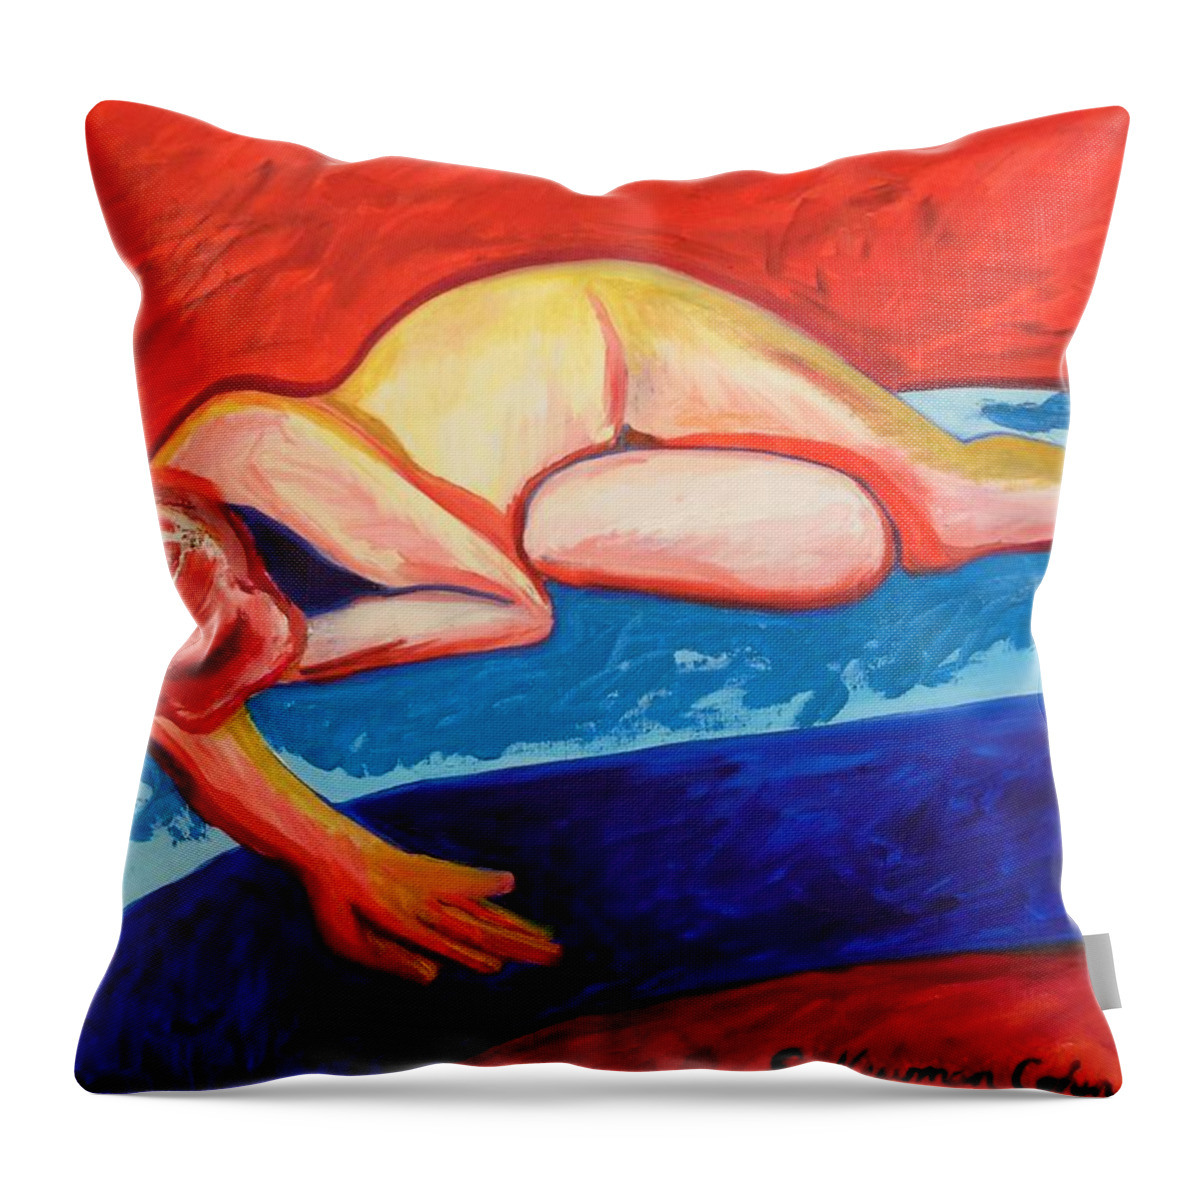 The Blues In Red Rhapsody Throw Pillow featuring the painting The Blues in Red Rhapsody by Esther Newman-Cohen